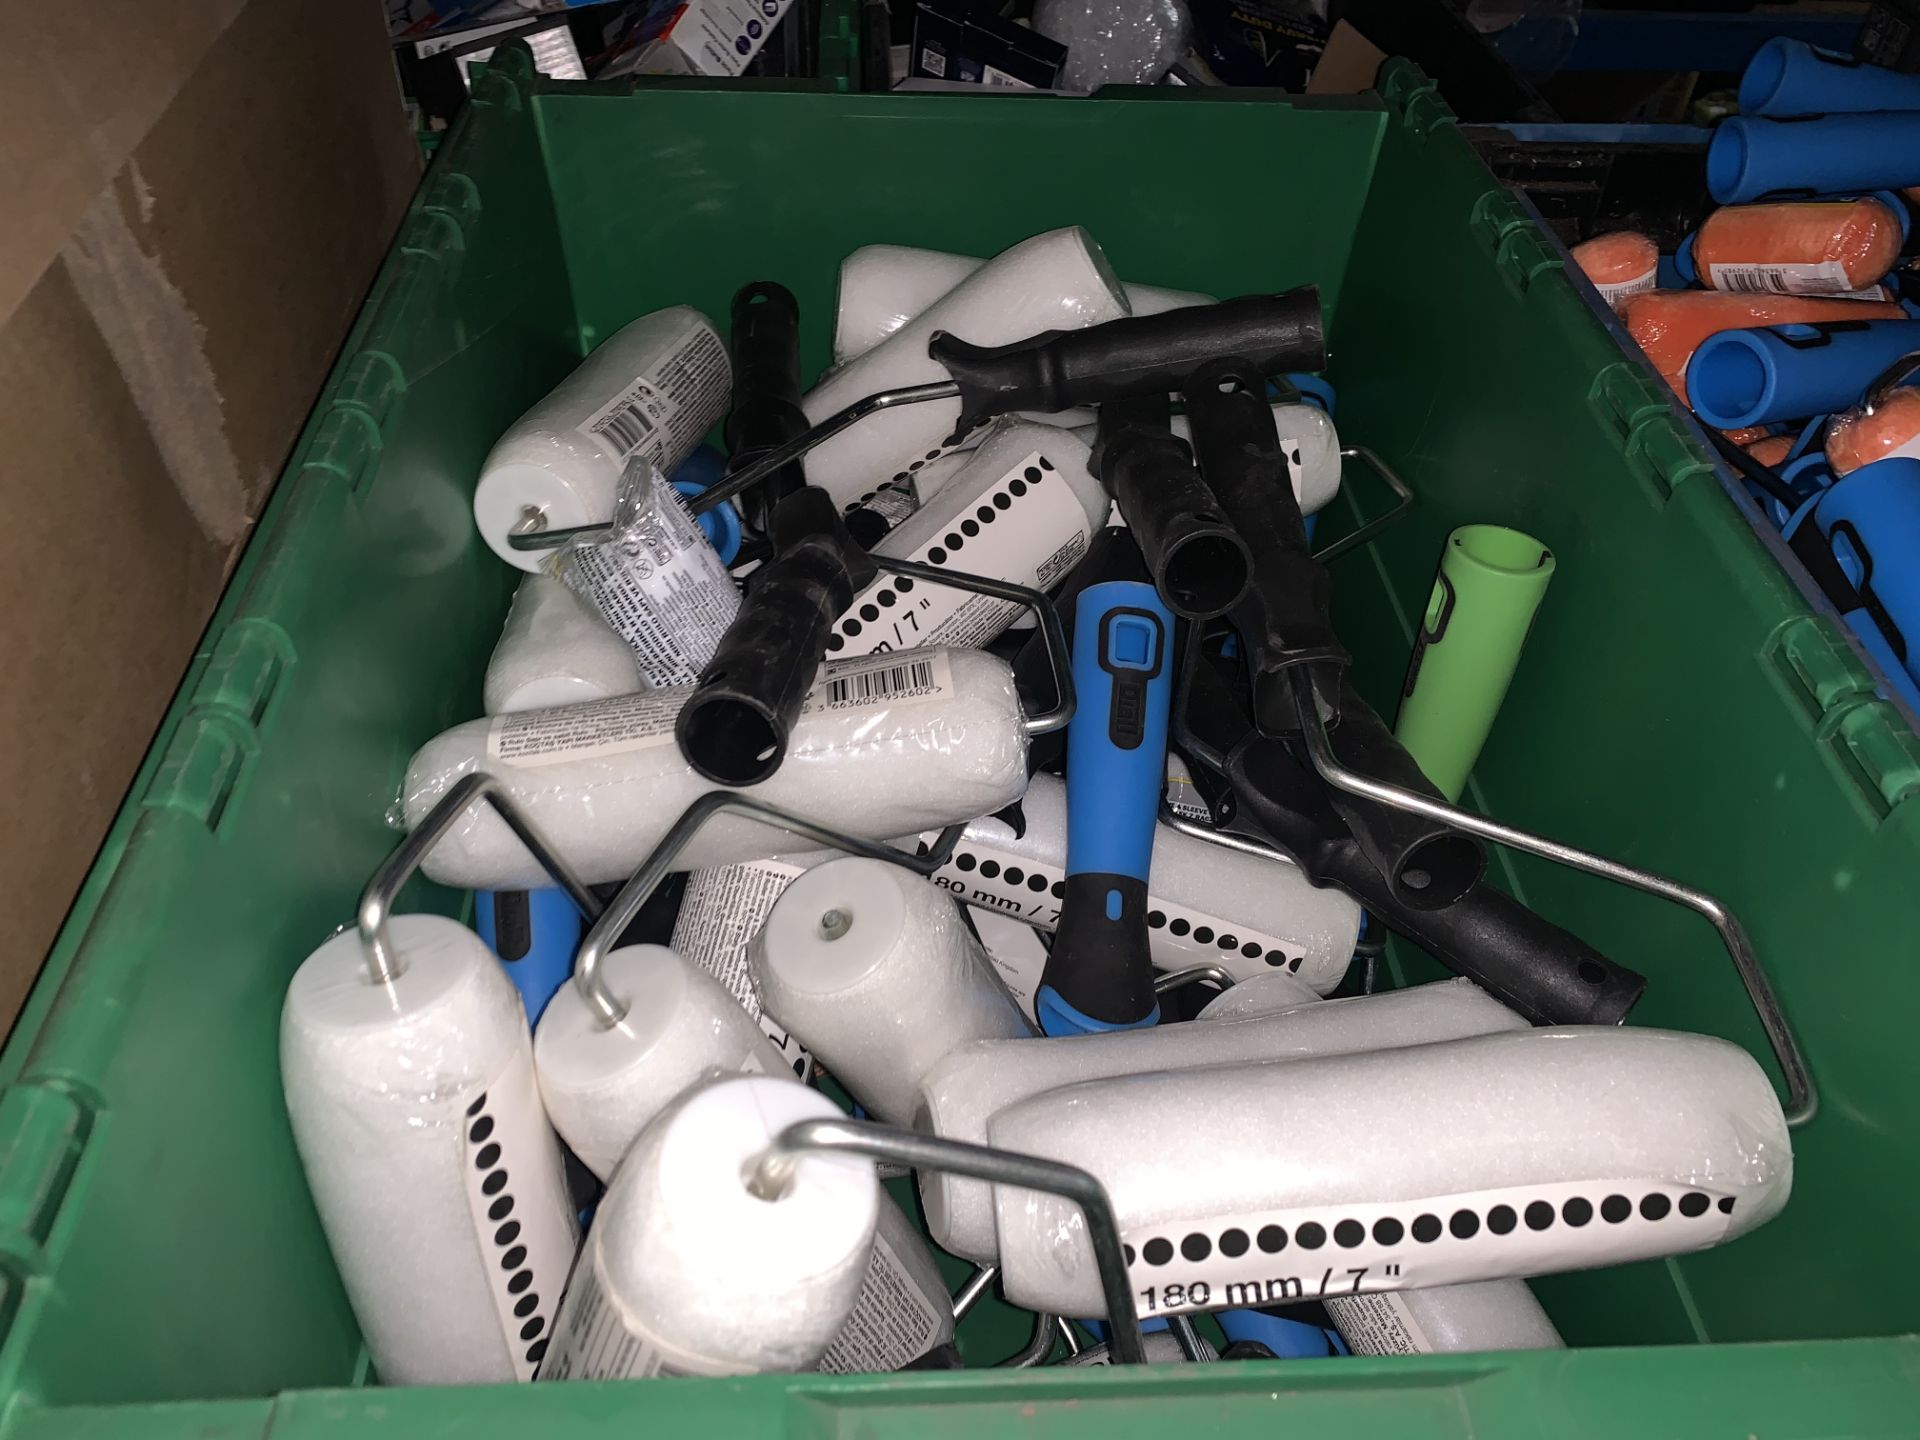 50 X VARIOUS BRAND NEW ROLLERS WITH SLEEVES